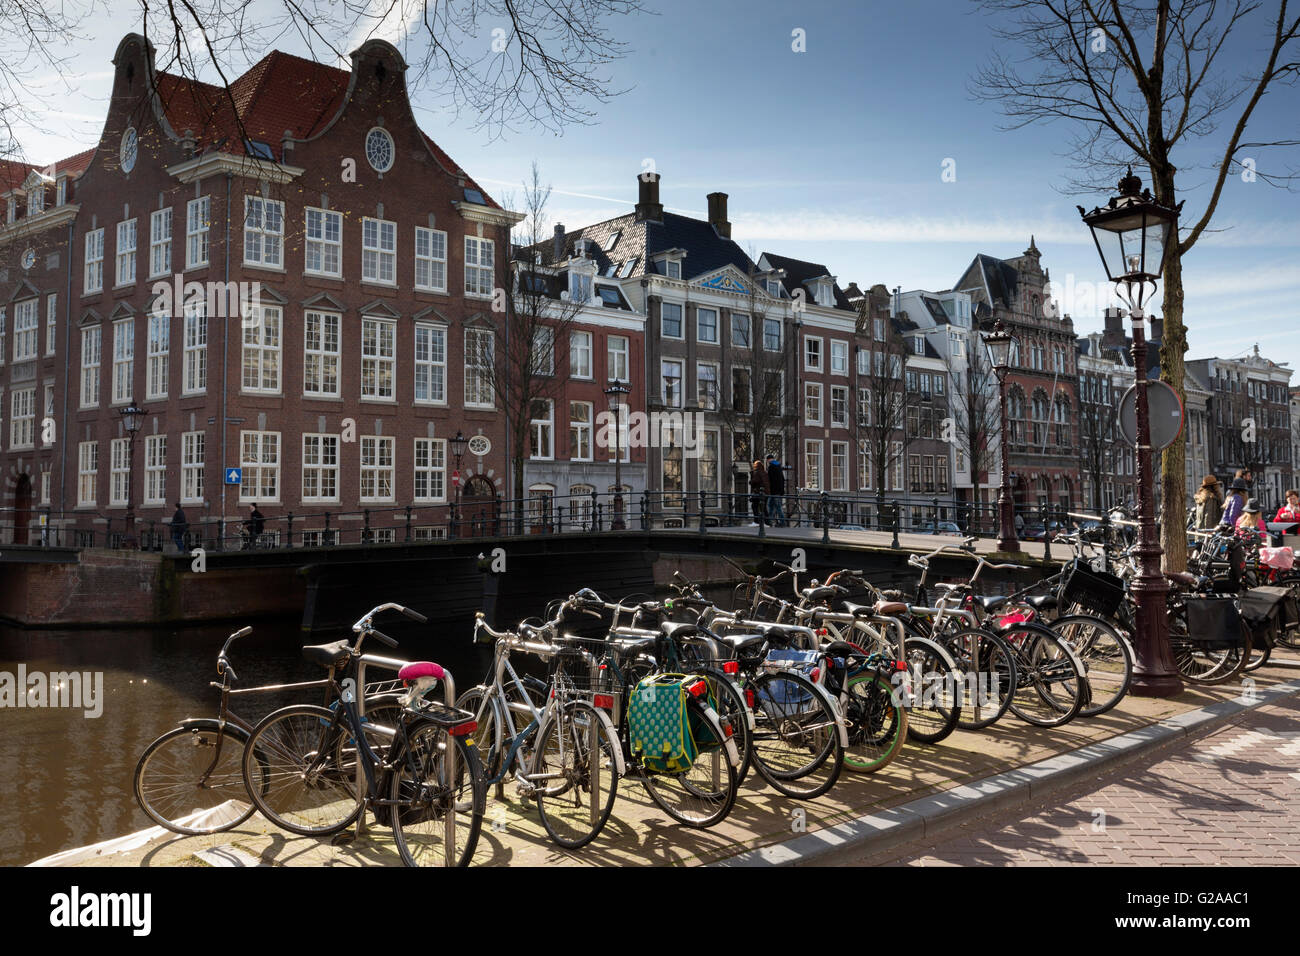 Bicycles line a canal in central Amsterdam. Cycling is a popular means of transport within the city. Stock Photo